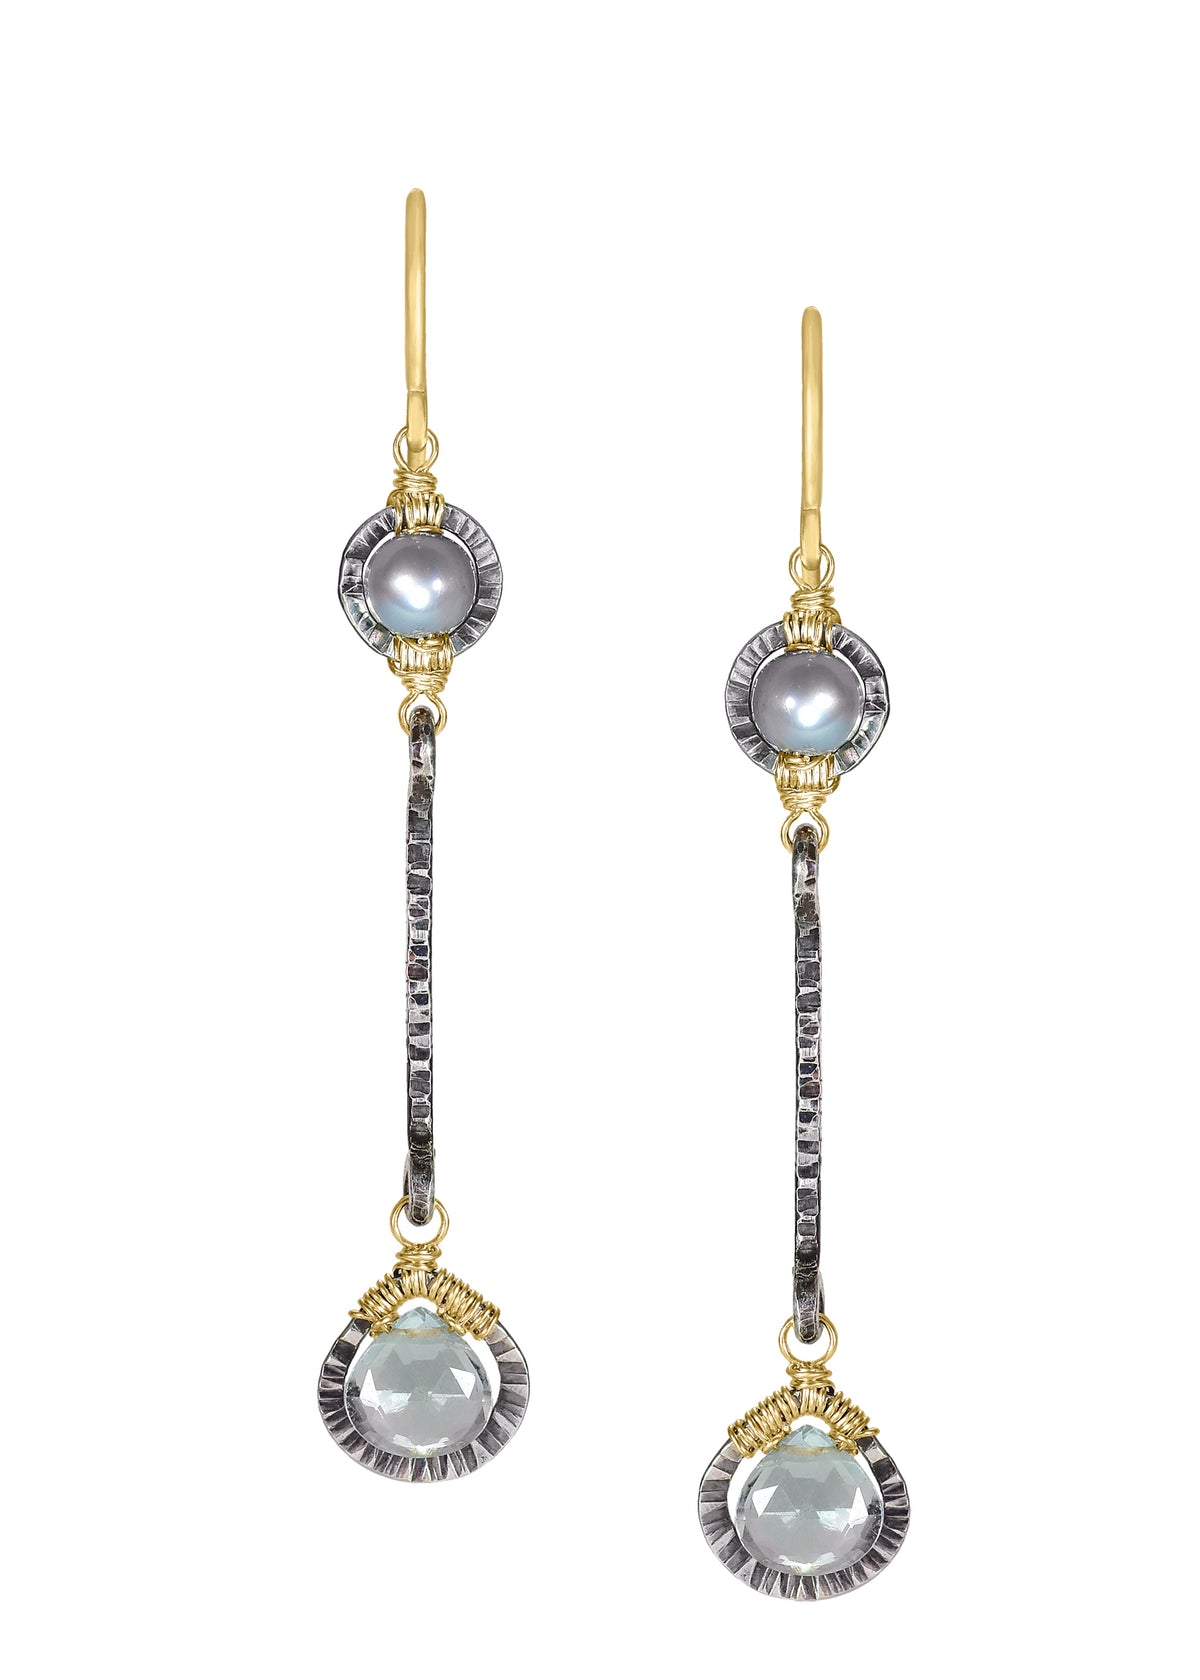 Labradorite Freshwater pearls Sterling silver 14k gold fill Mixed metal Earrings measure 2&quot; in length (including the ear wires) and 1/4&quot; in width at the widest point (bottom drop) Handmade in our Los Angeles studio